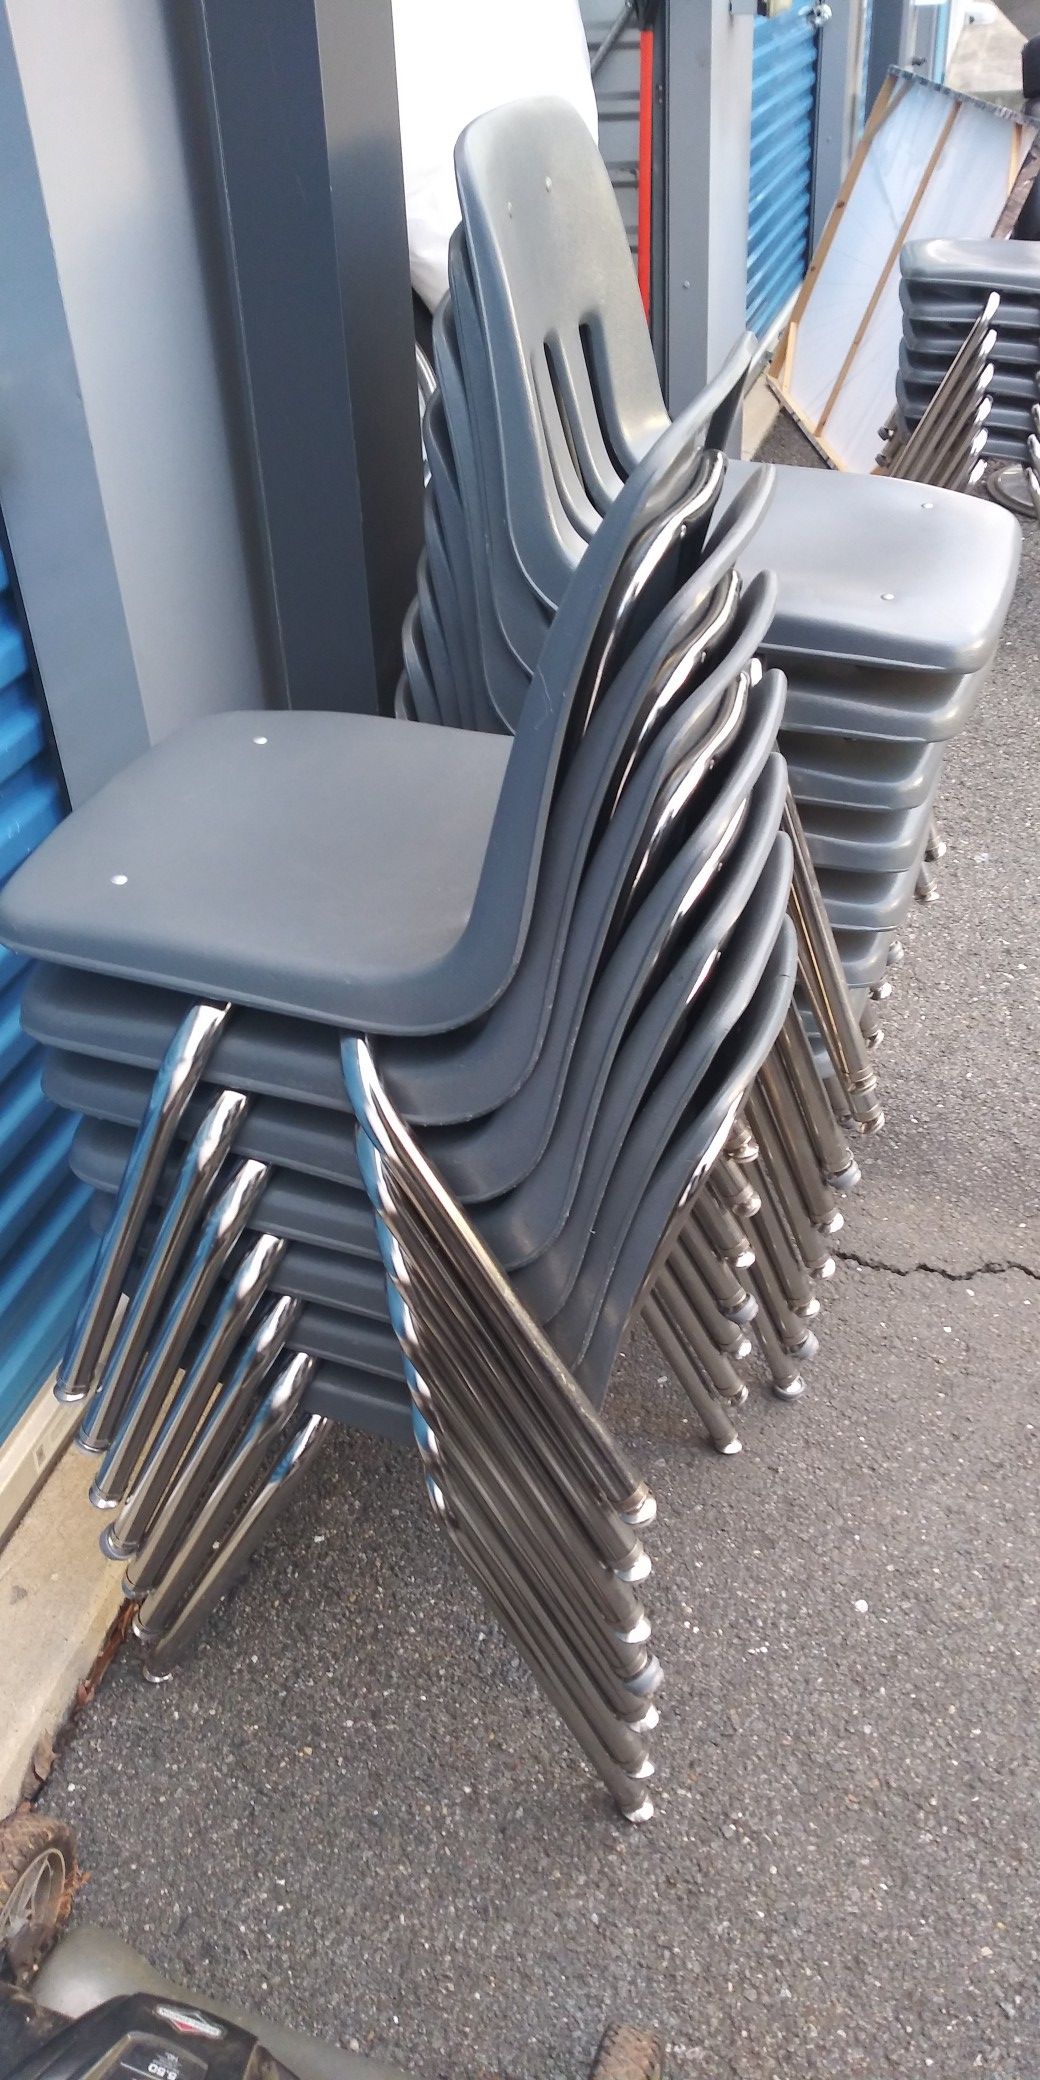 Student Classroom chairs . $10.00 for one